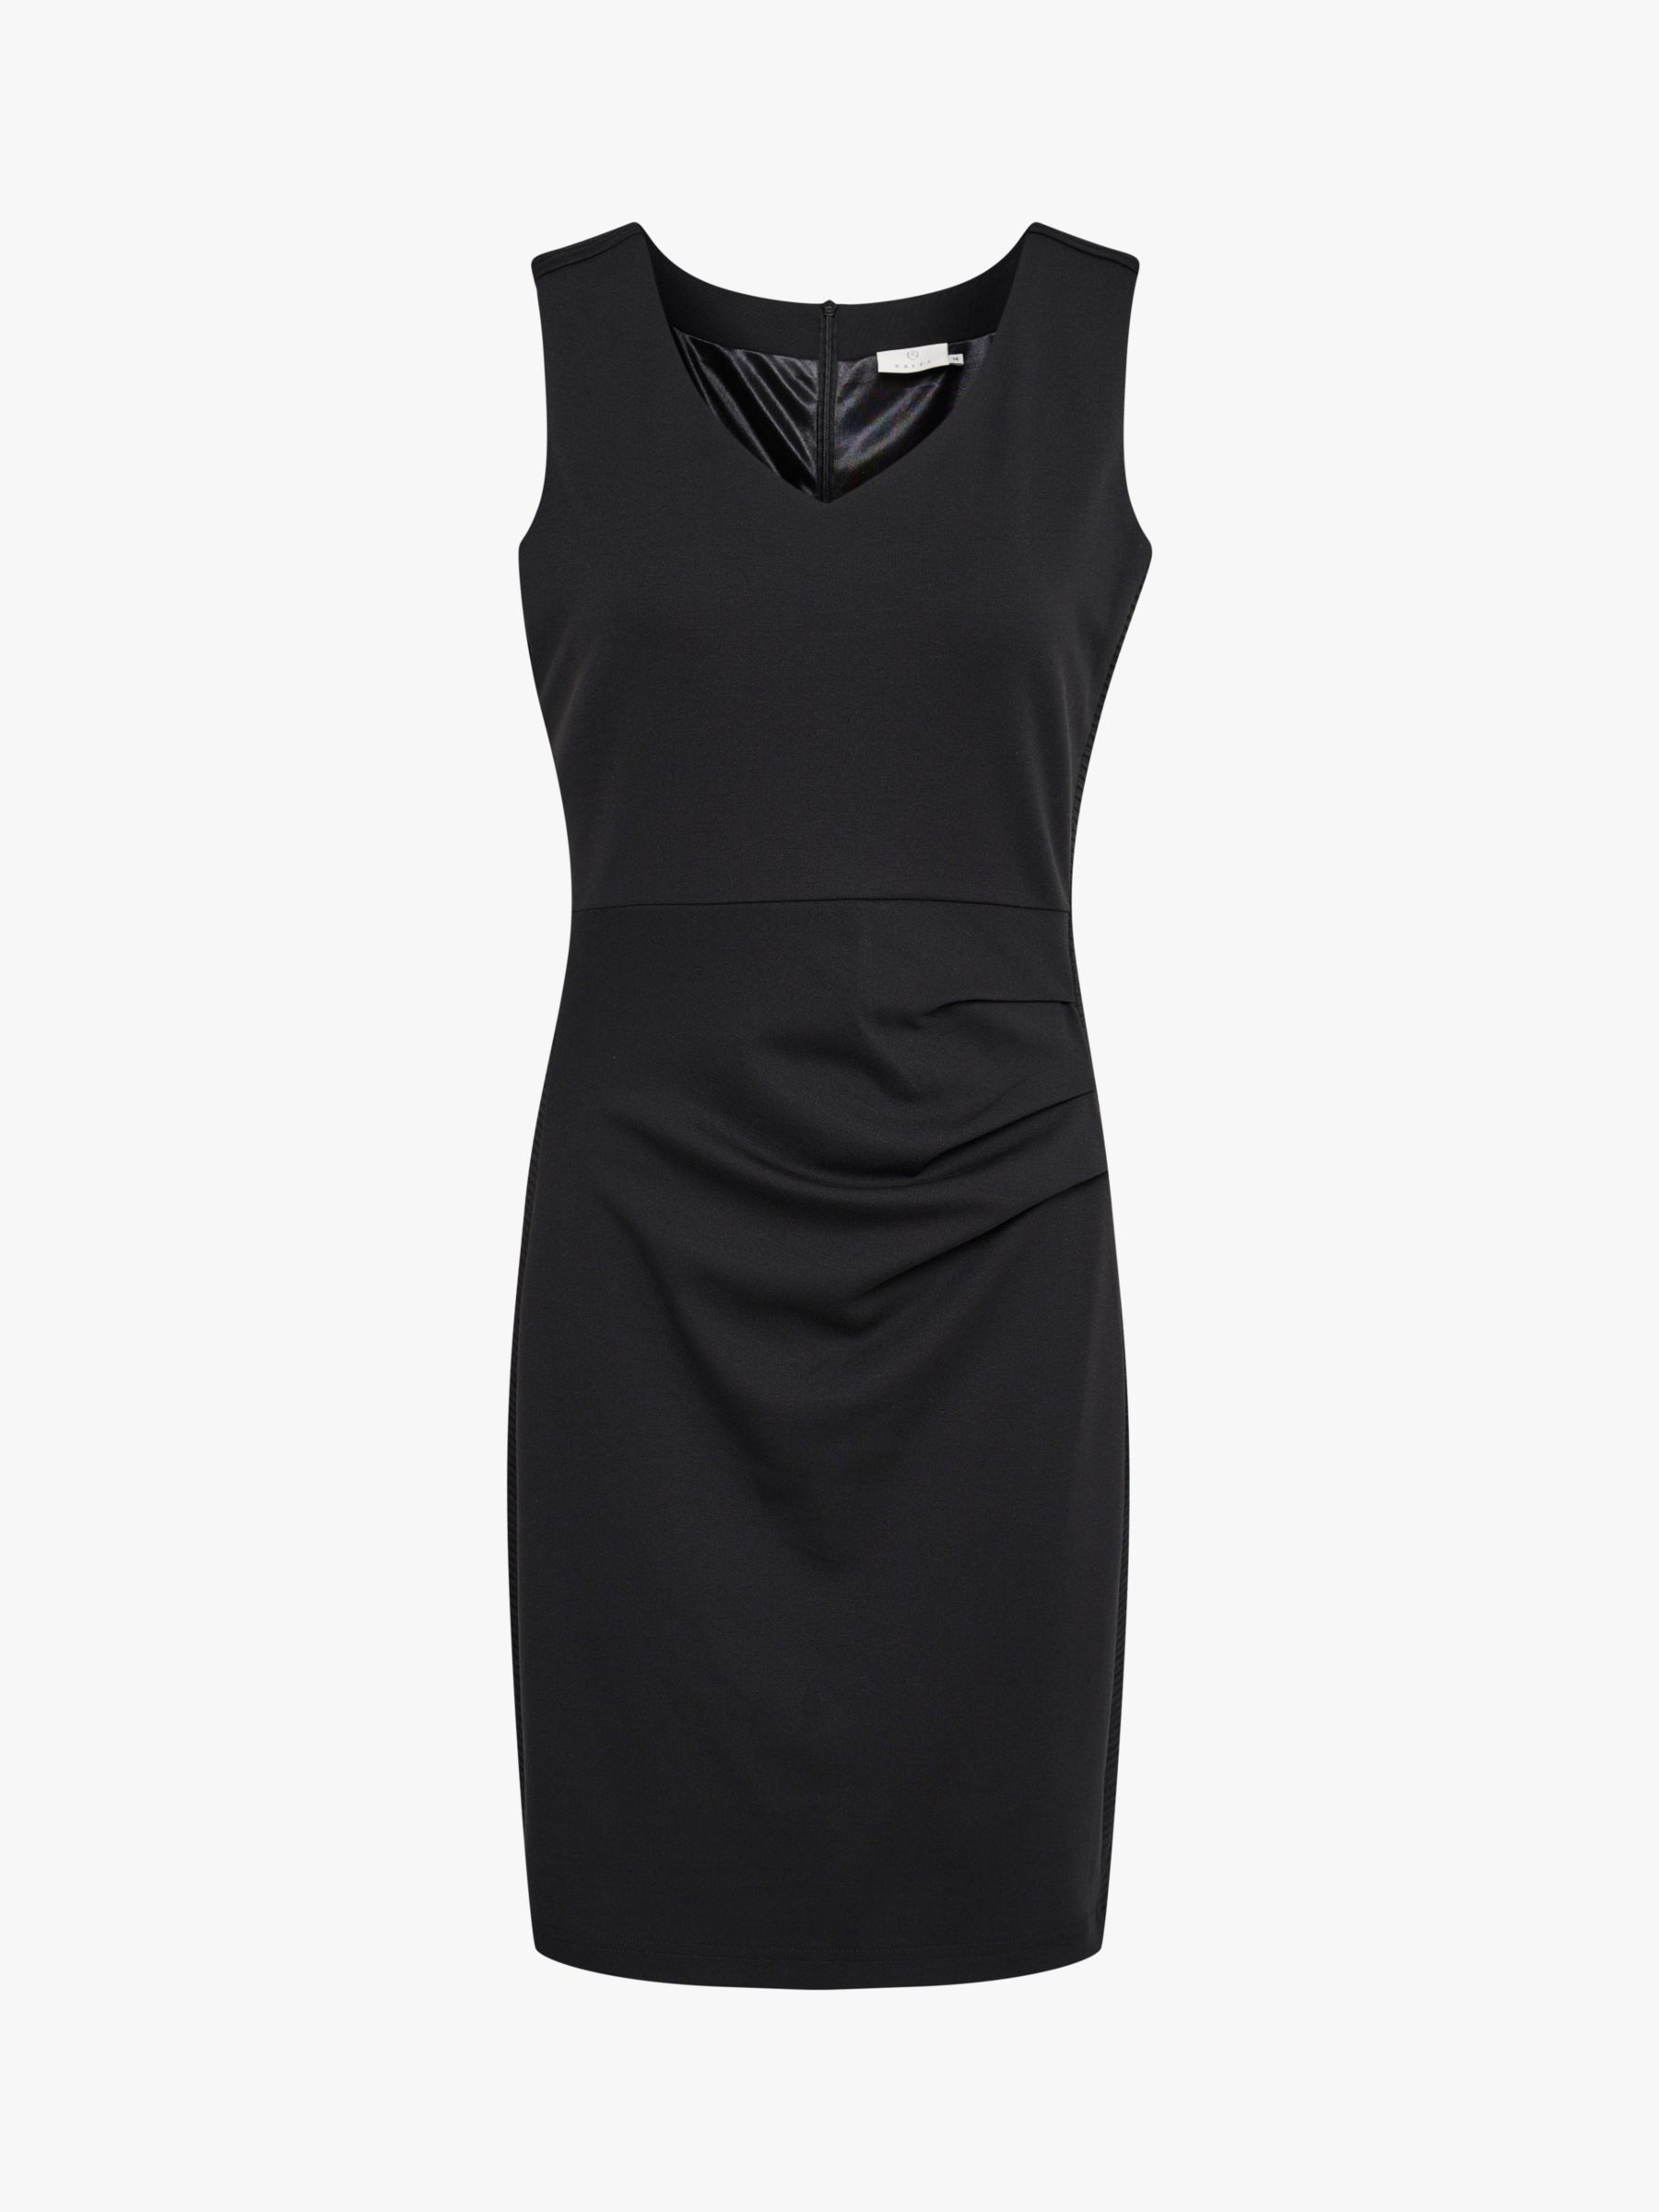 Dresses To Wear To A Funeral | John Lewis & Partners